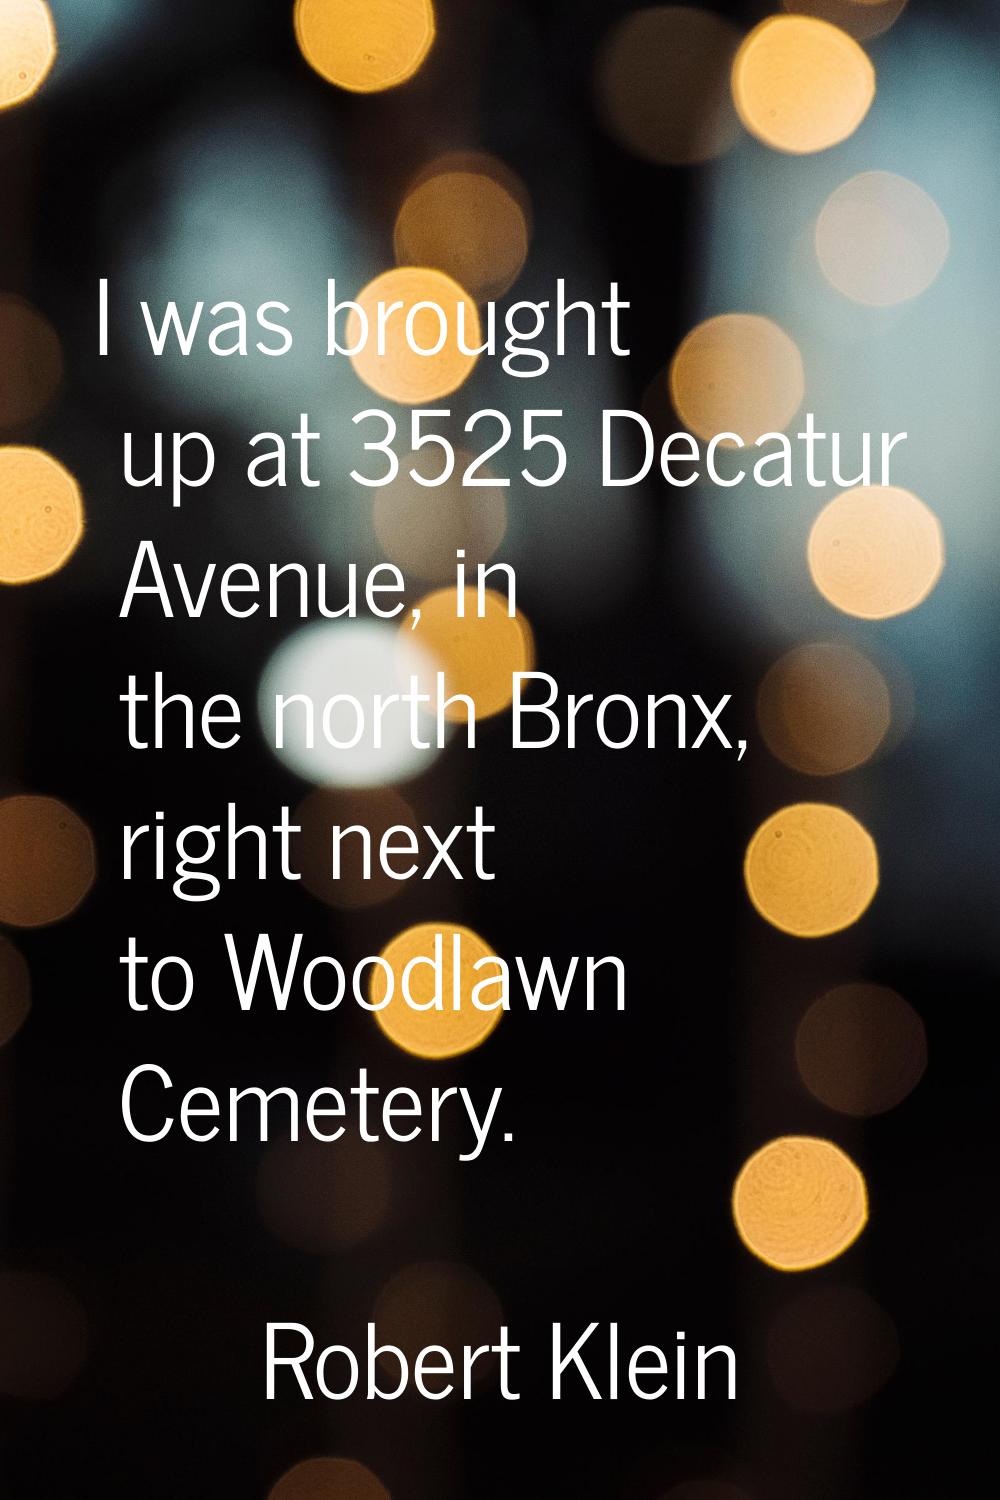 I was brought up at 3525 Decatur Avenue, in the north Bronx, right next to Woodlawn Cemetery.